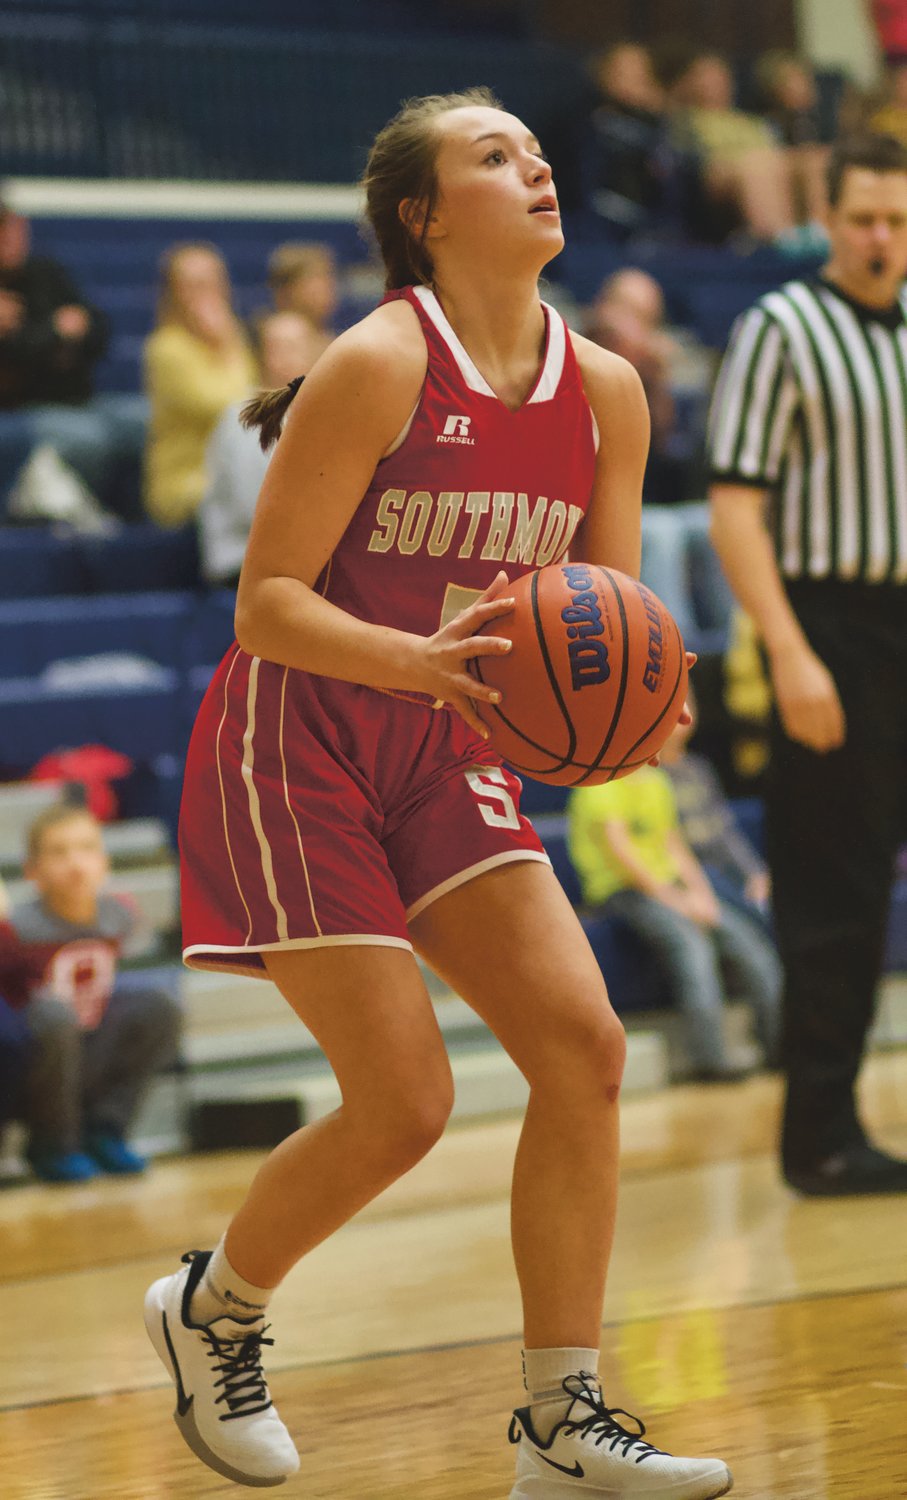 Southmont's Emma Ward knocked down four 3-pointers and led the Mounties to a 46-22 win over Fountain Central with a 14-point night.